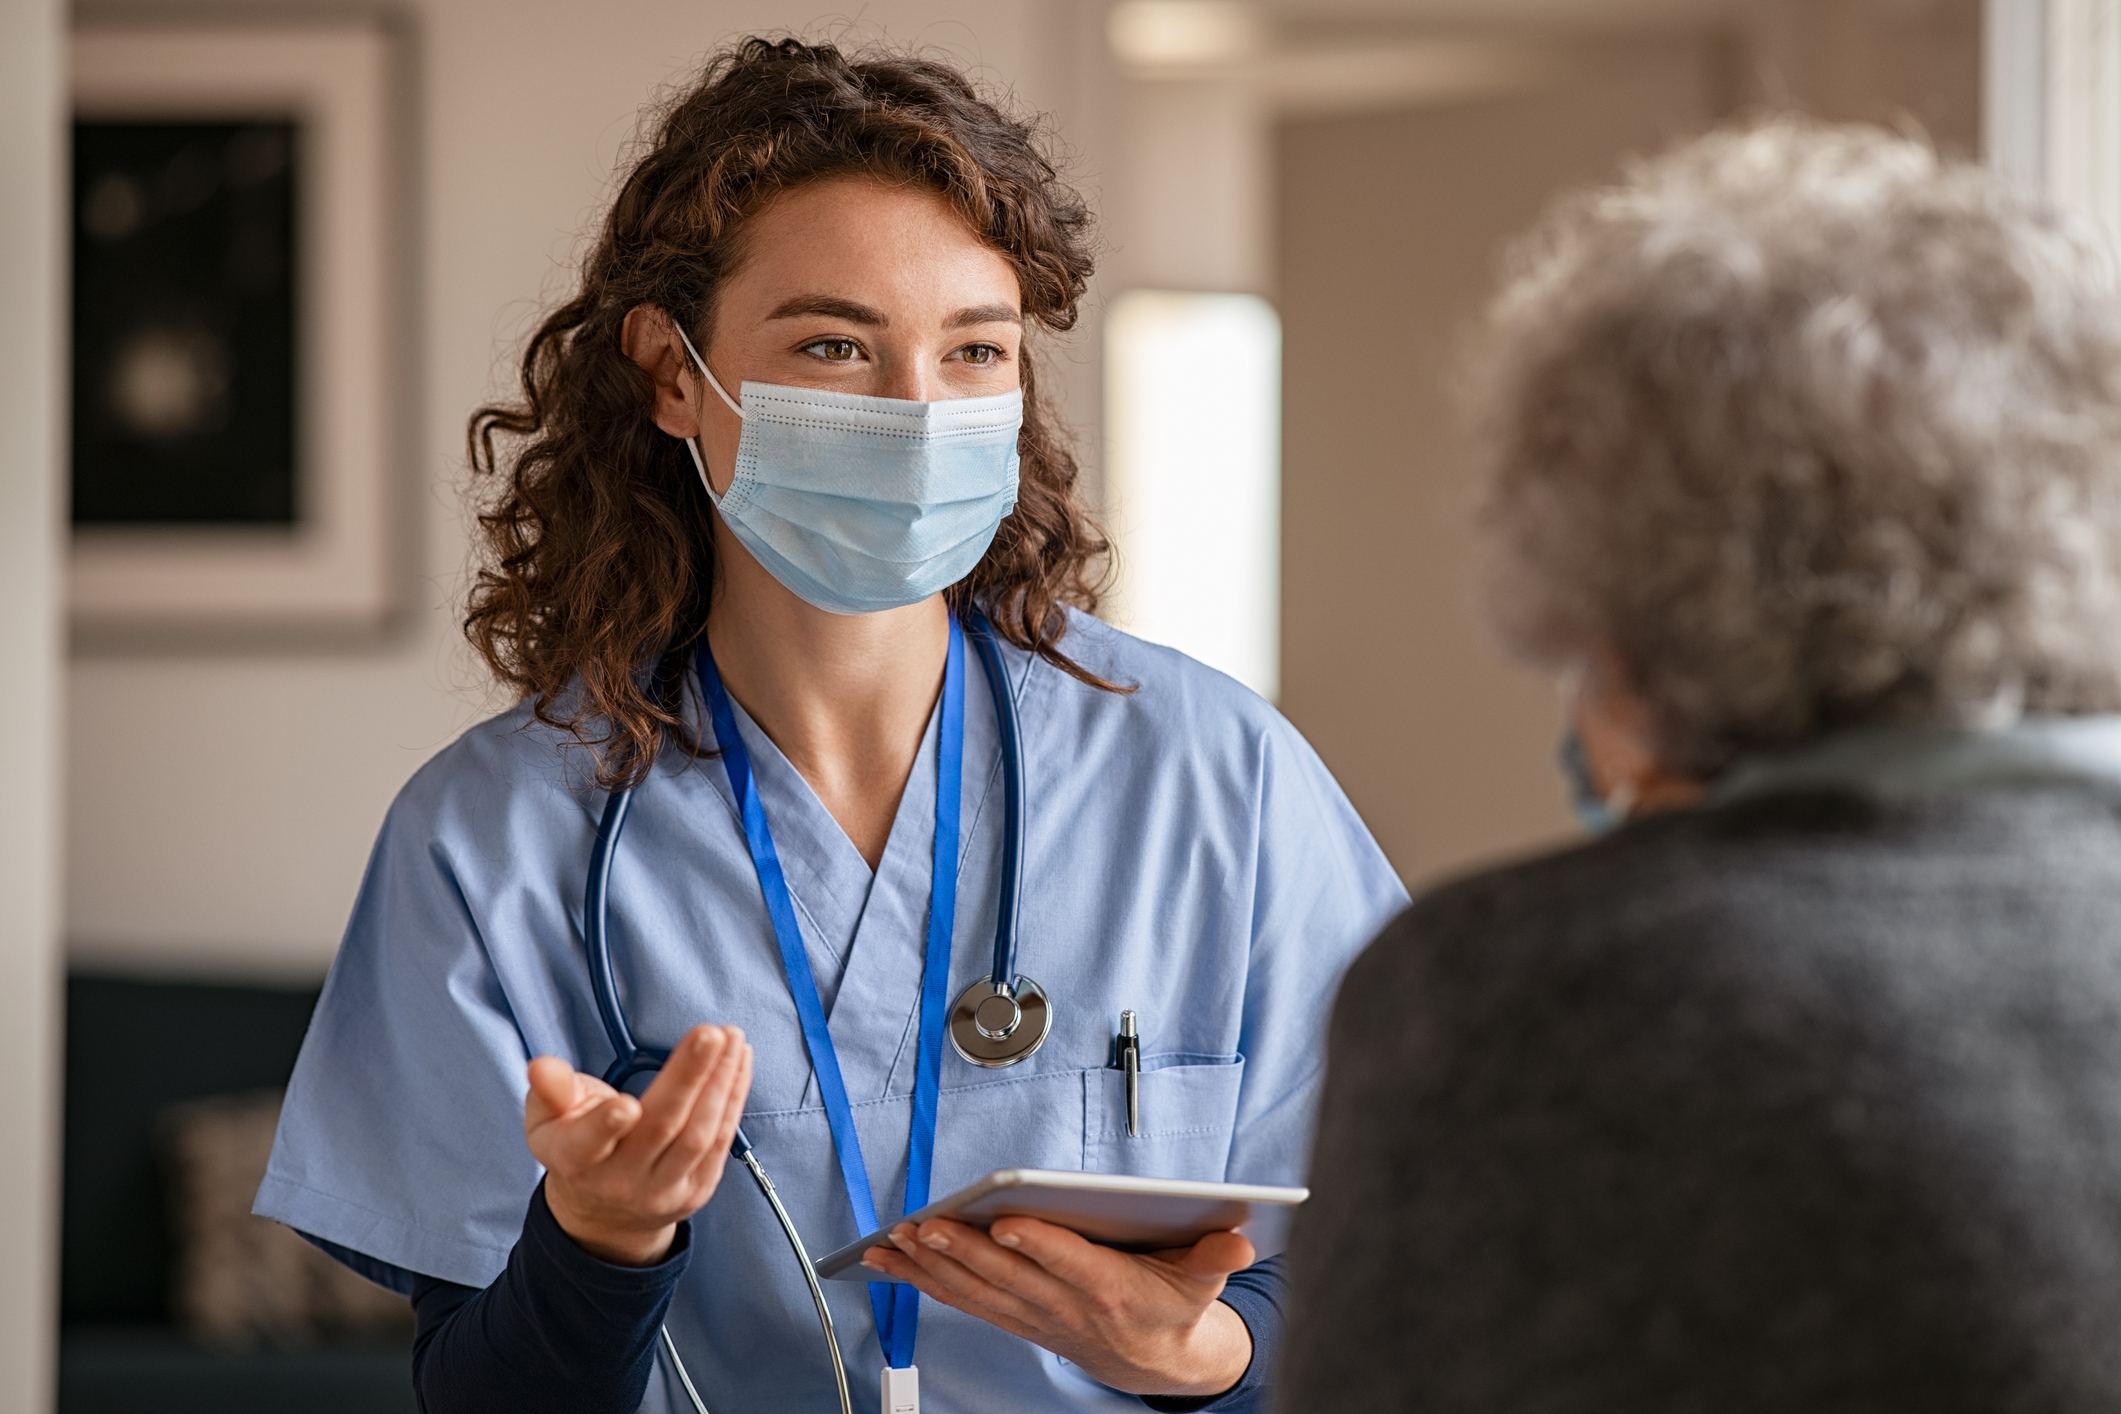 A nurse with a mask on talking to a patient